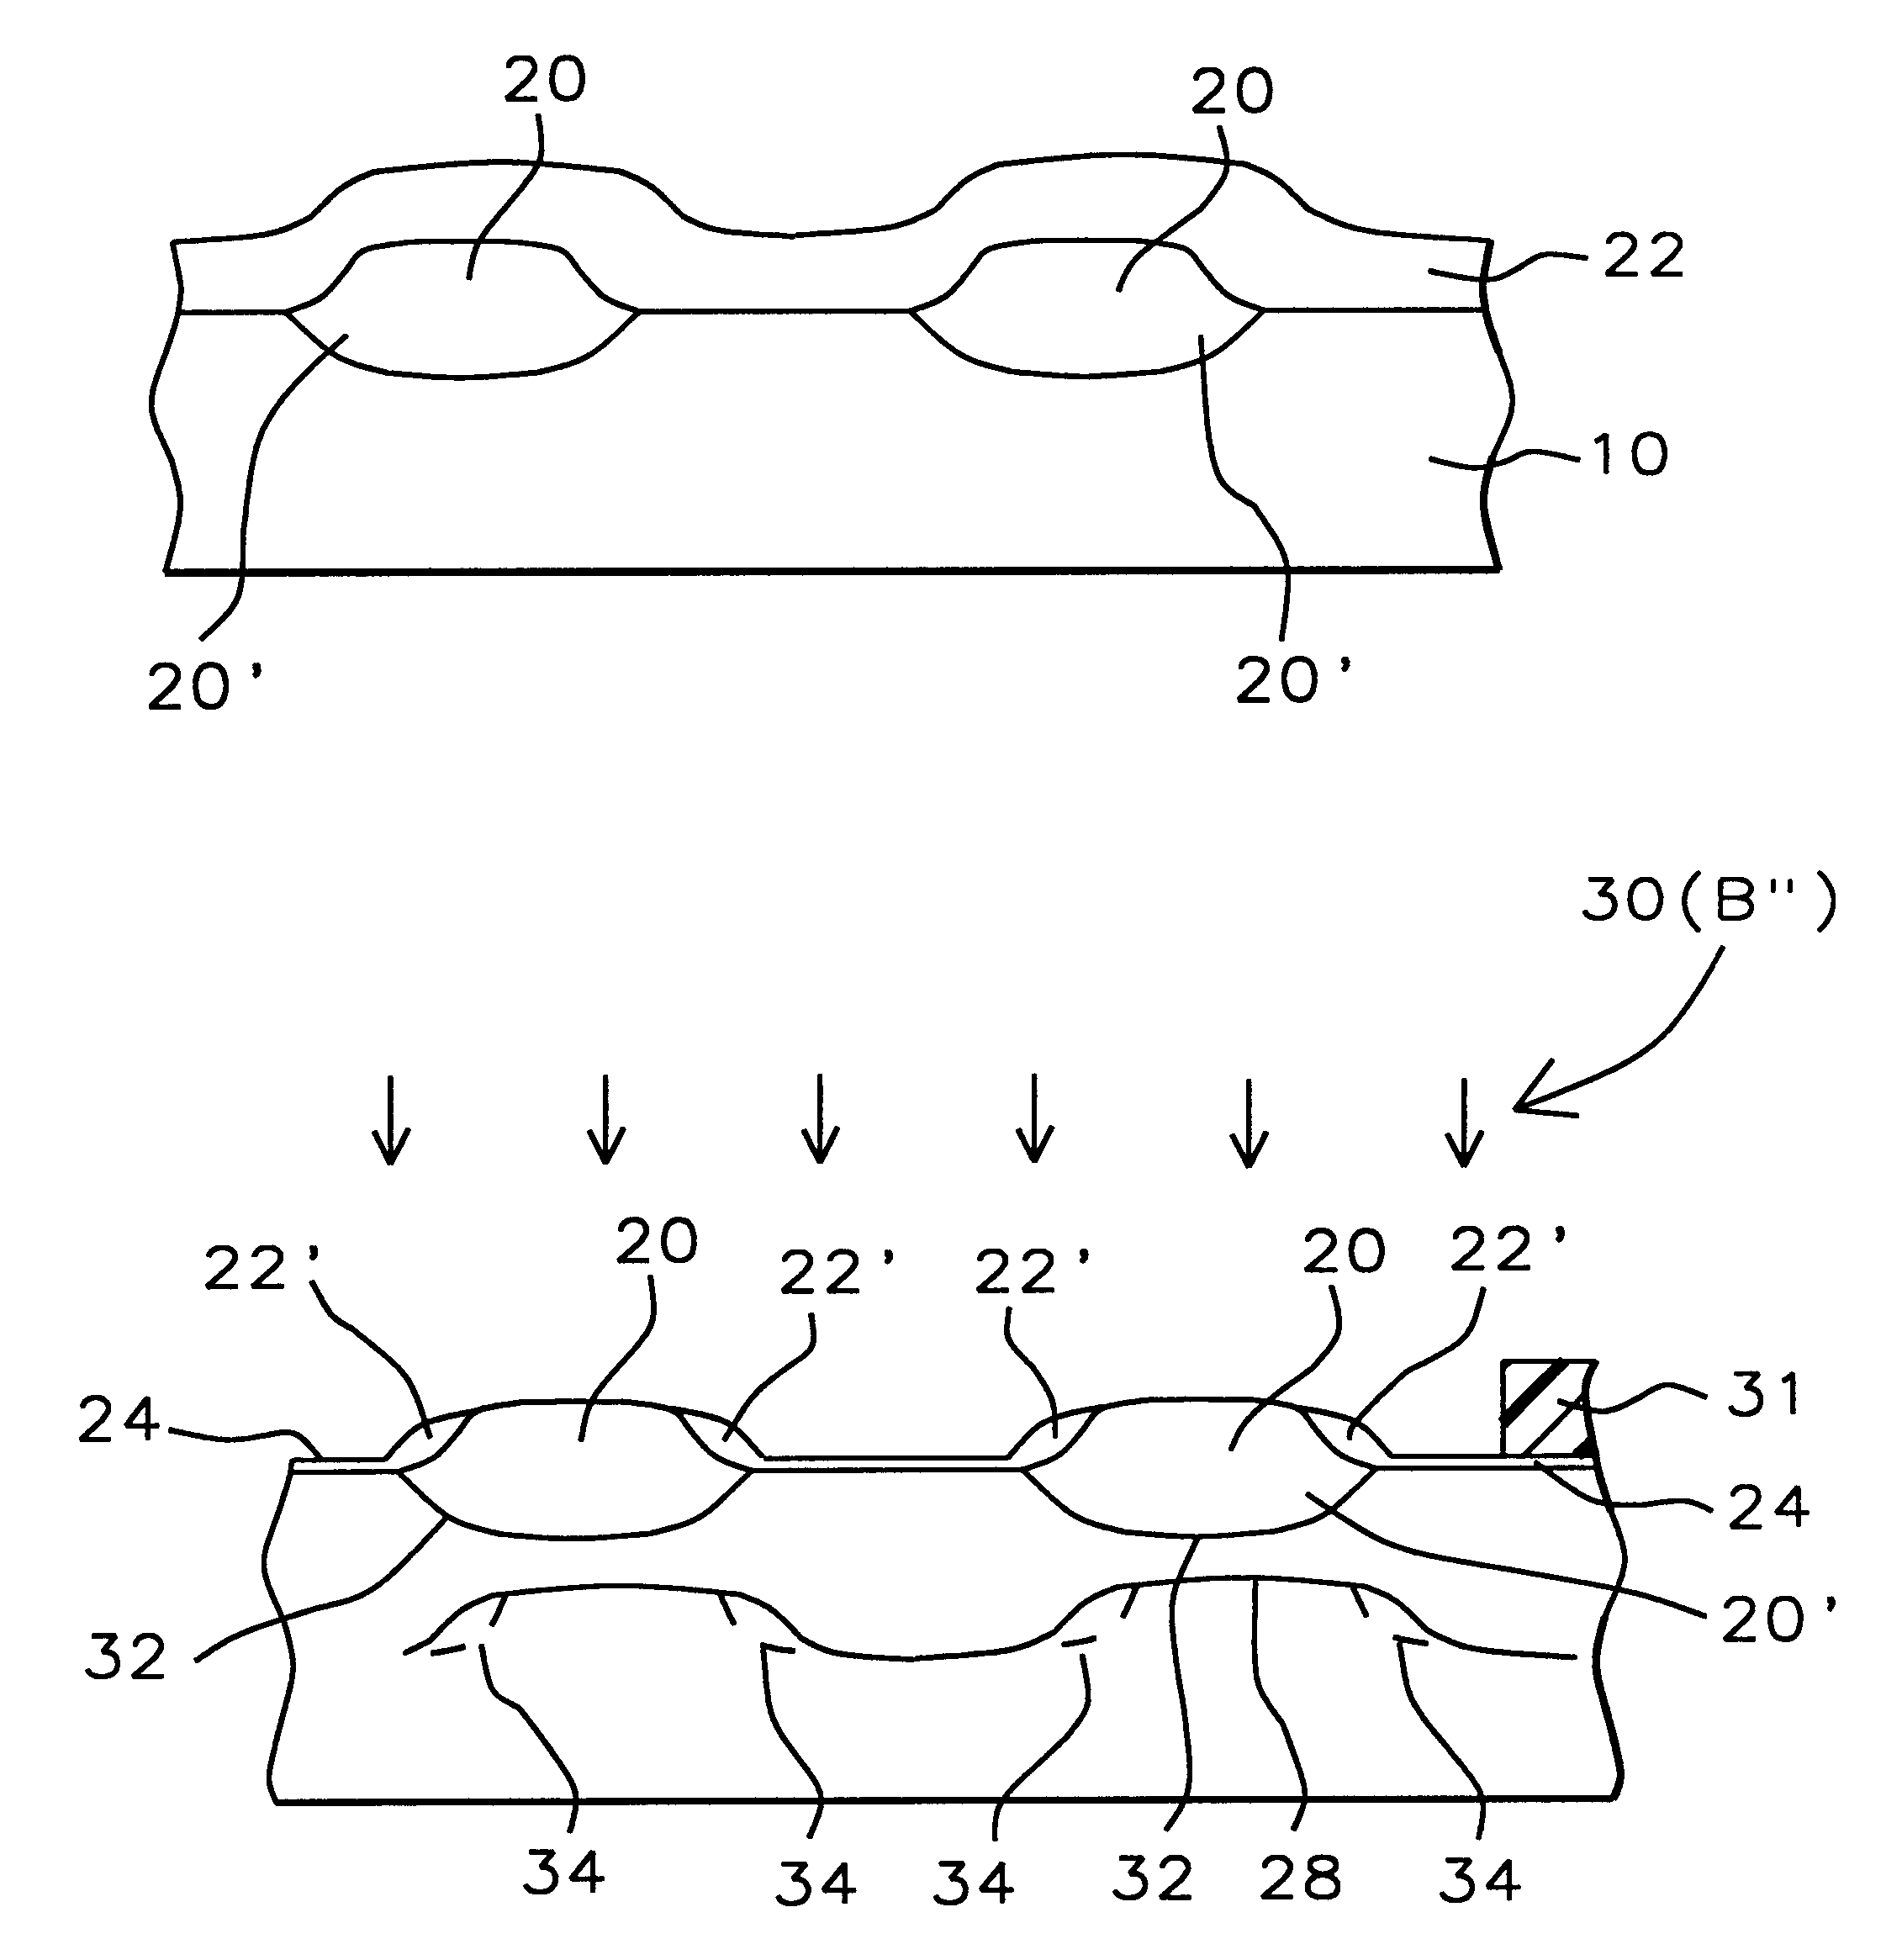 Method of making an improved field oxide isolation structure for semiconductor integrated circuits having higher field oxide threshold voltages